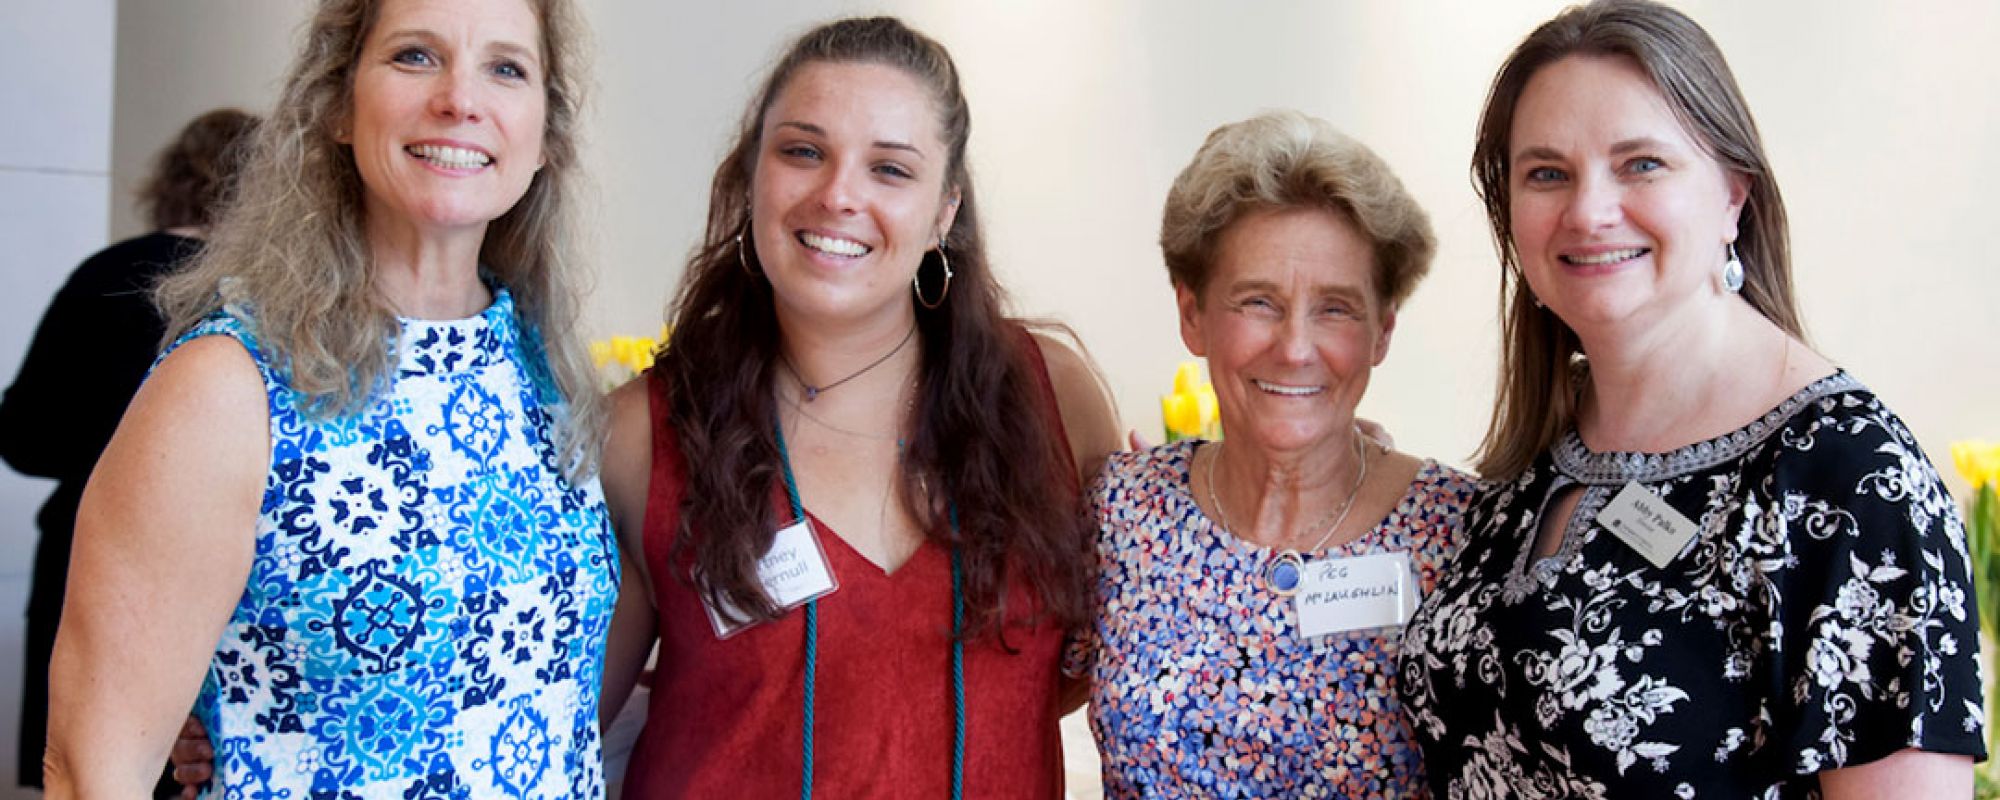 Courtney Cuppernull with her mother, grandmother, and Women's Center Director Abby Palko